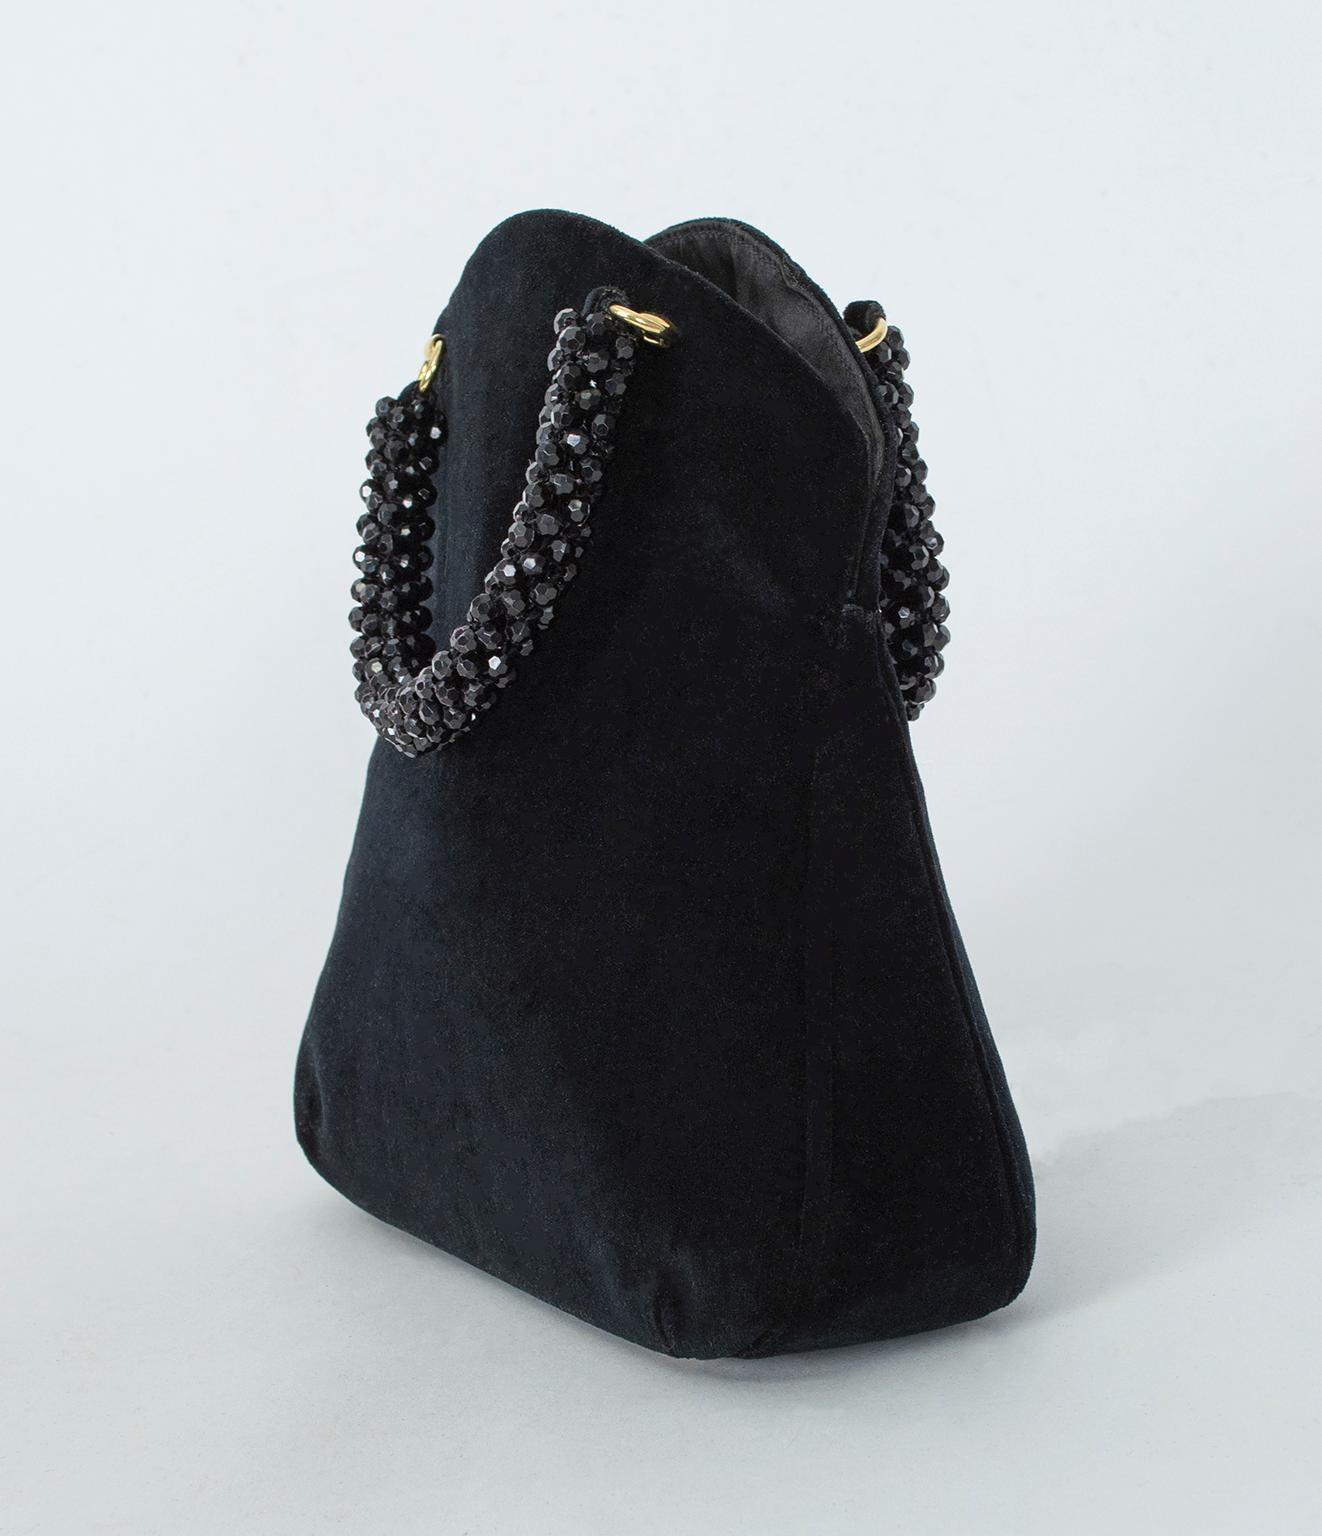 A significant departure from his loud psychedelic prints, this subdued black evening bag might be the last one you ever carry. With its unique hourglass shape, muted goldtone hardware and saturated black color, it will pair with almost anything. Its